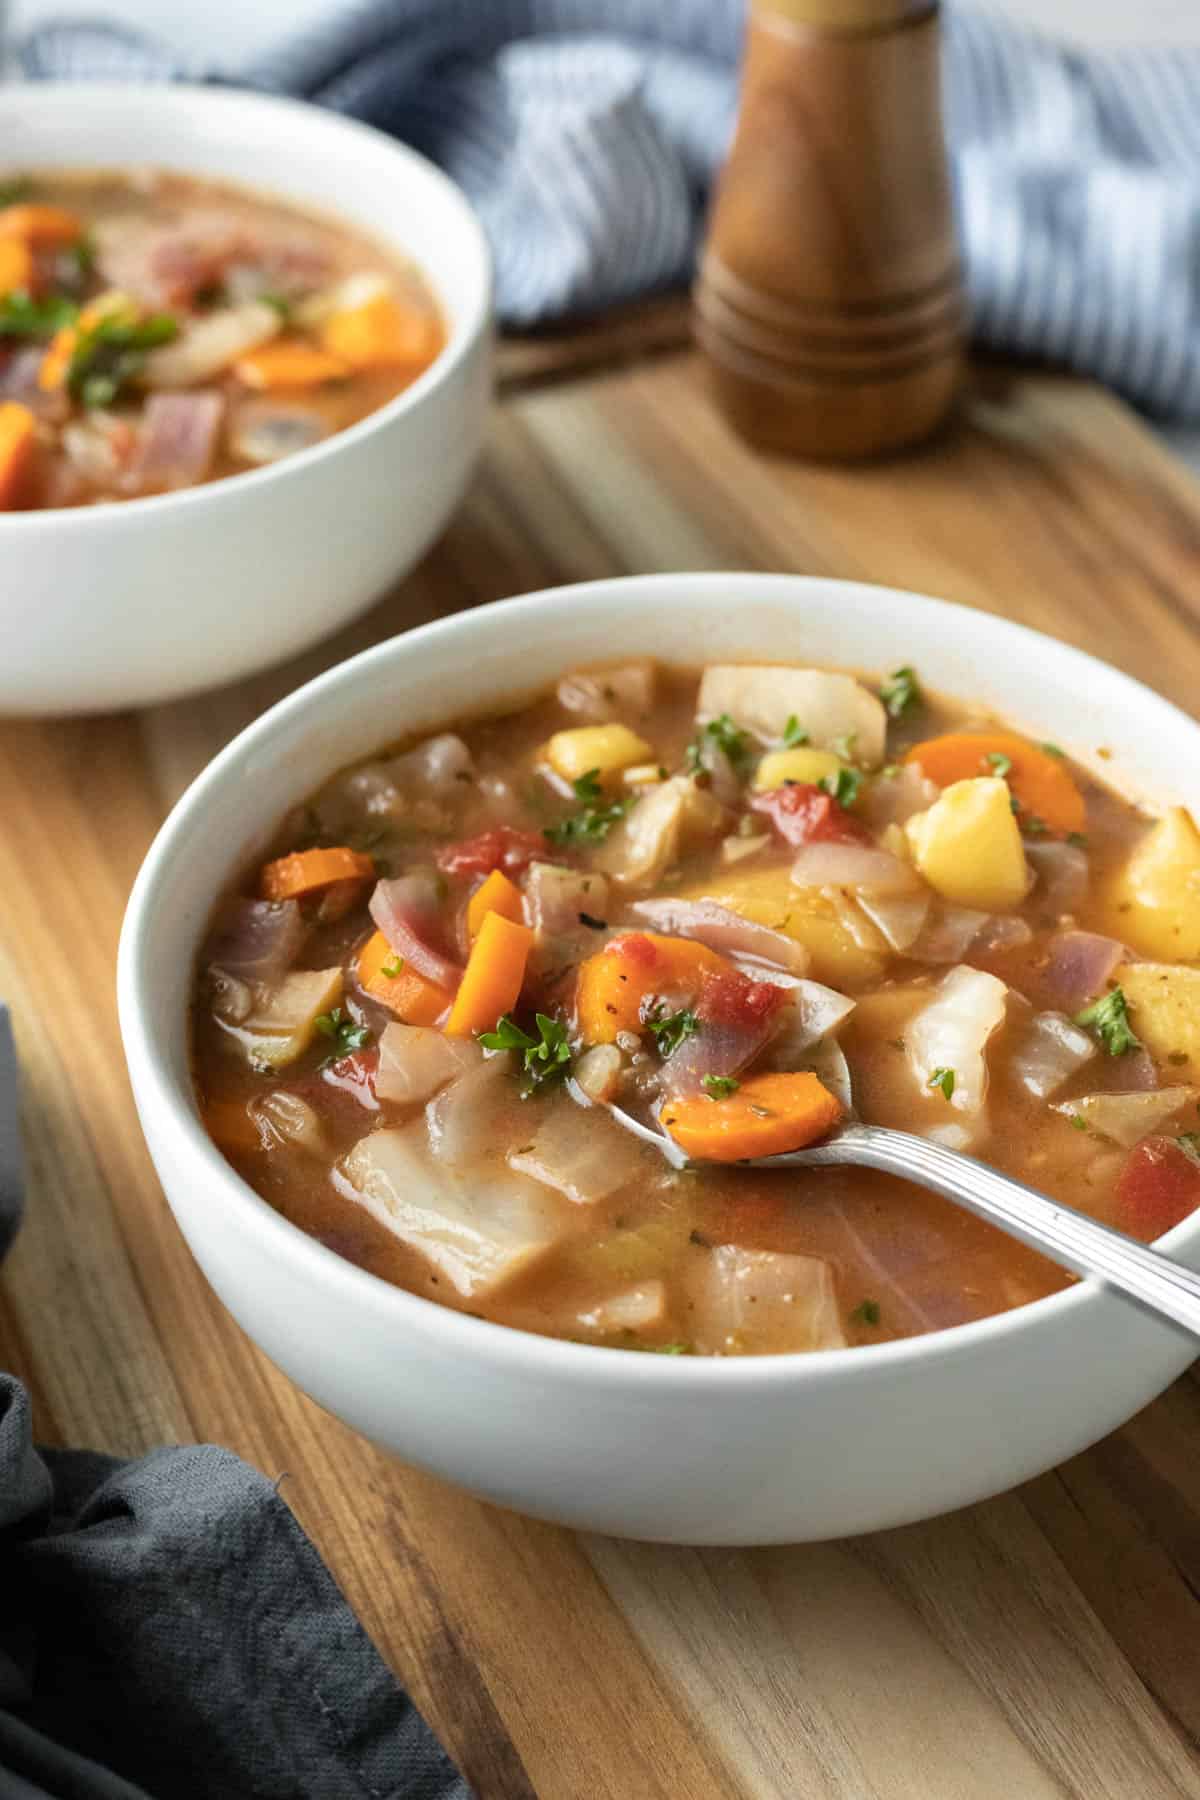 Colorful Instant Pot vegetable soup in a white bowl resting on a wooden serving board.